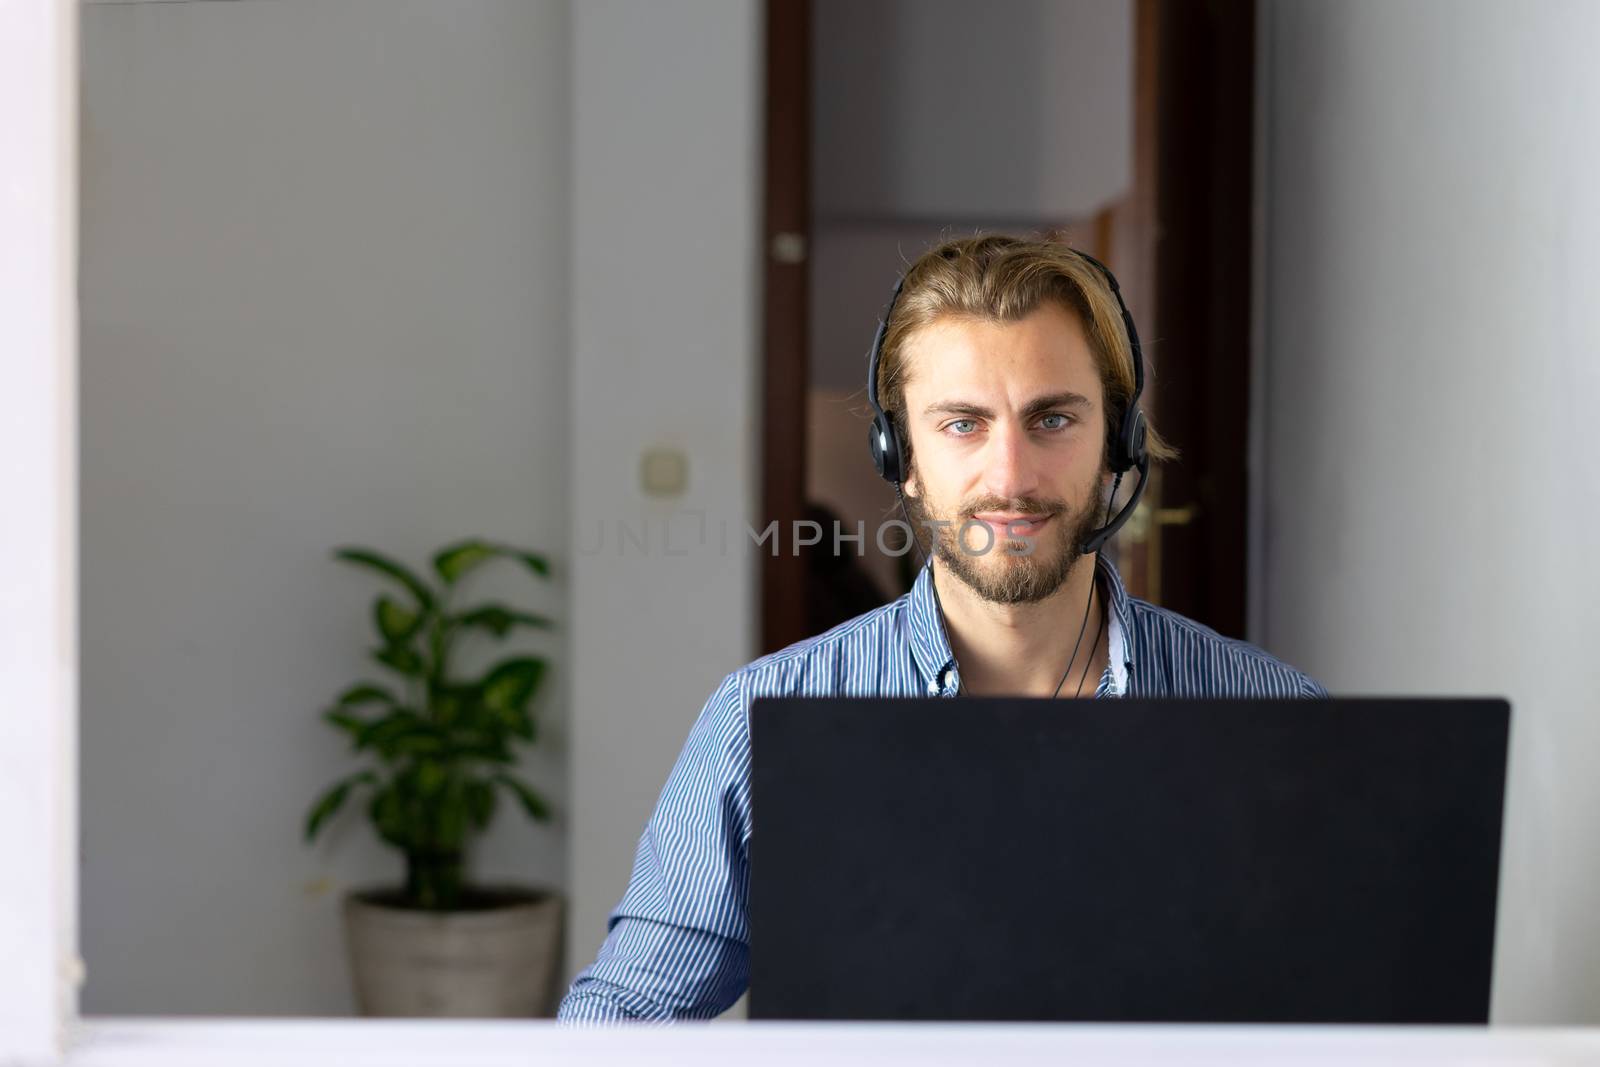 Blond male working from home with headphones using wireless internet on laptop, man call center agent or telemarketer